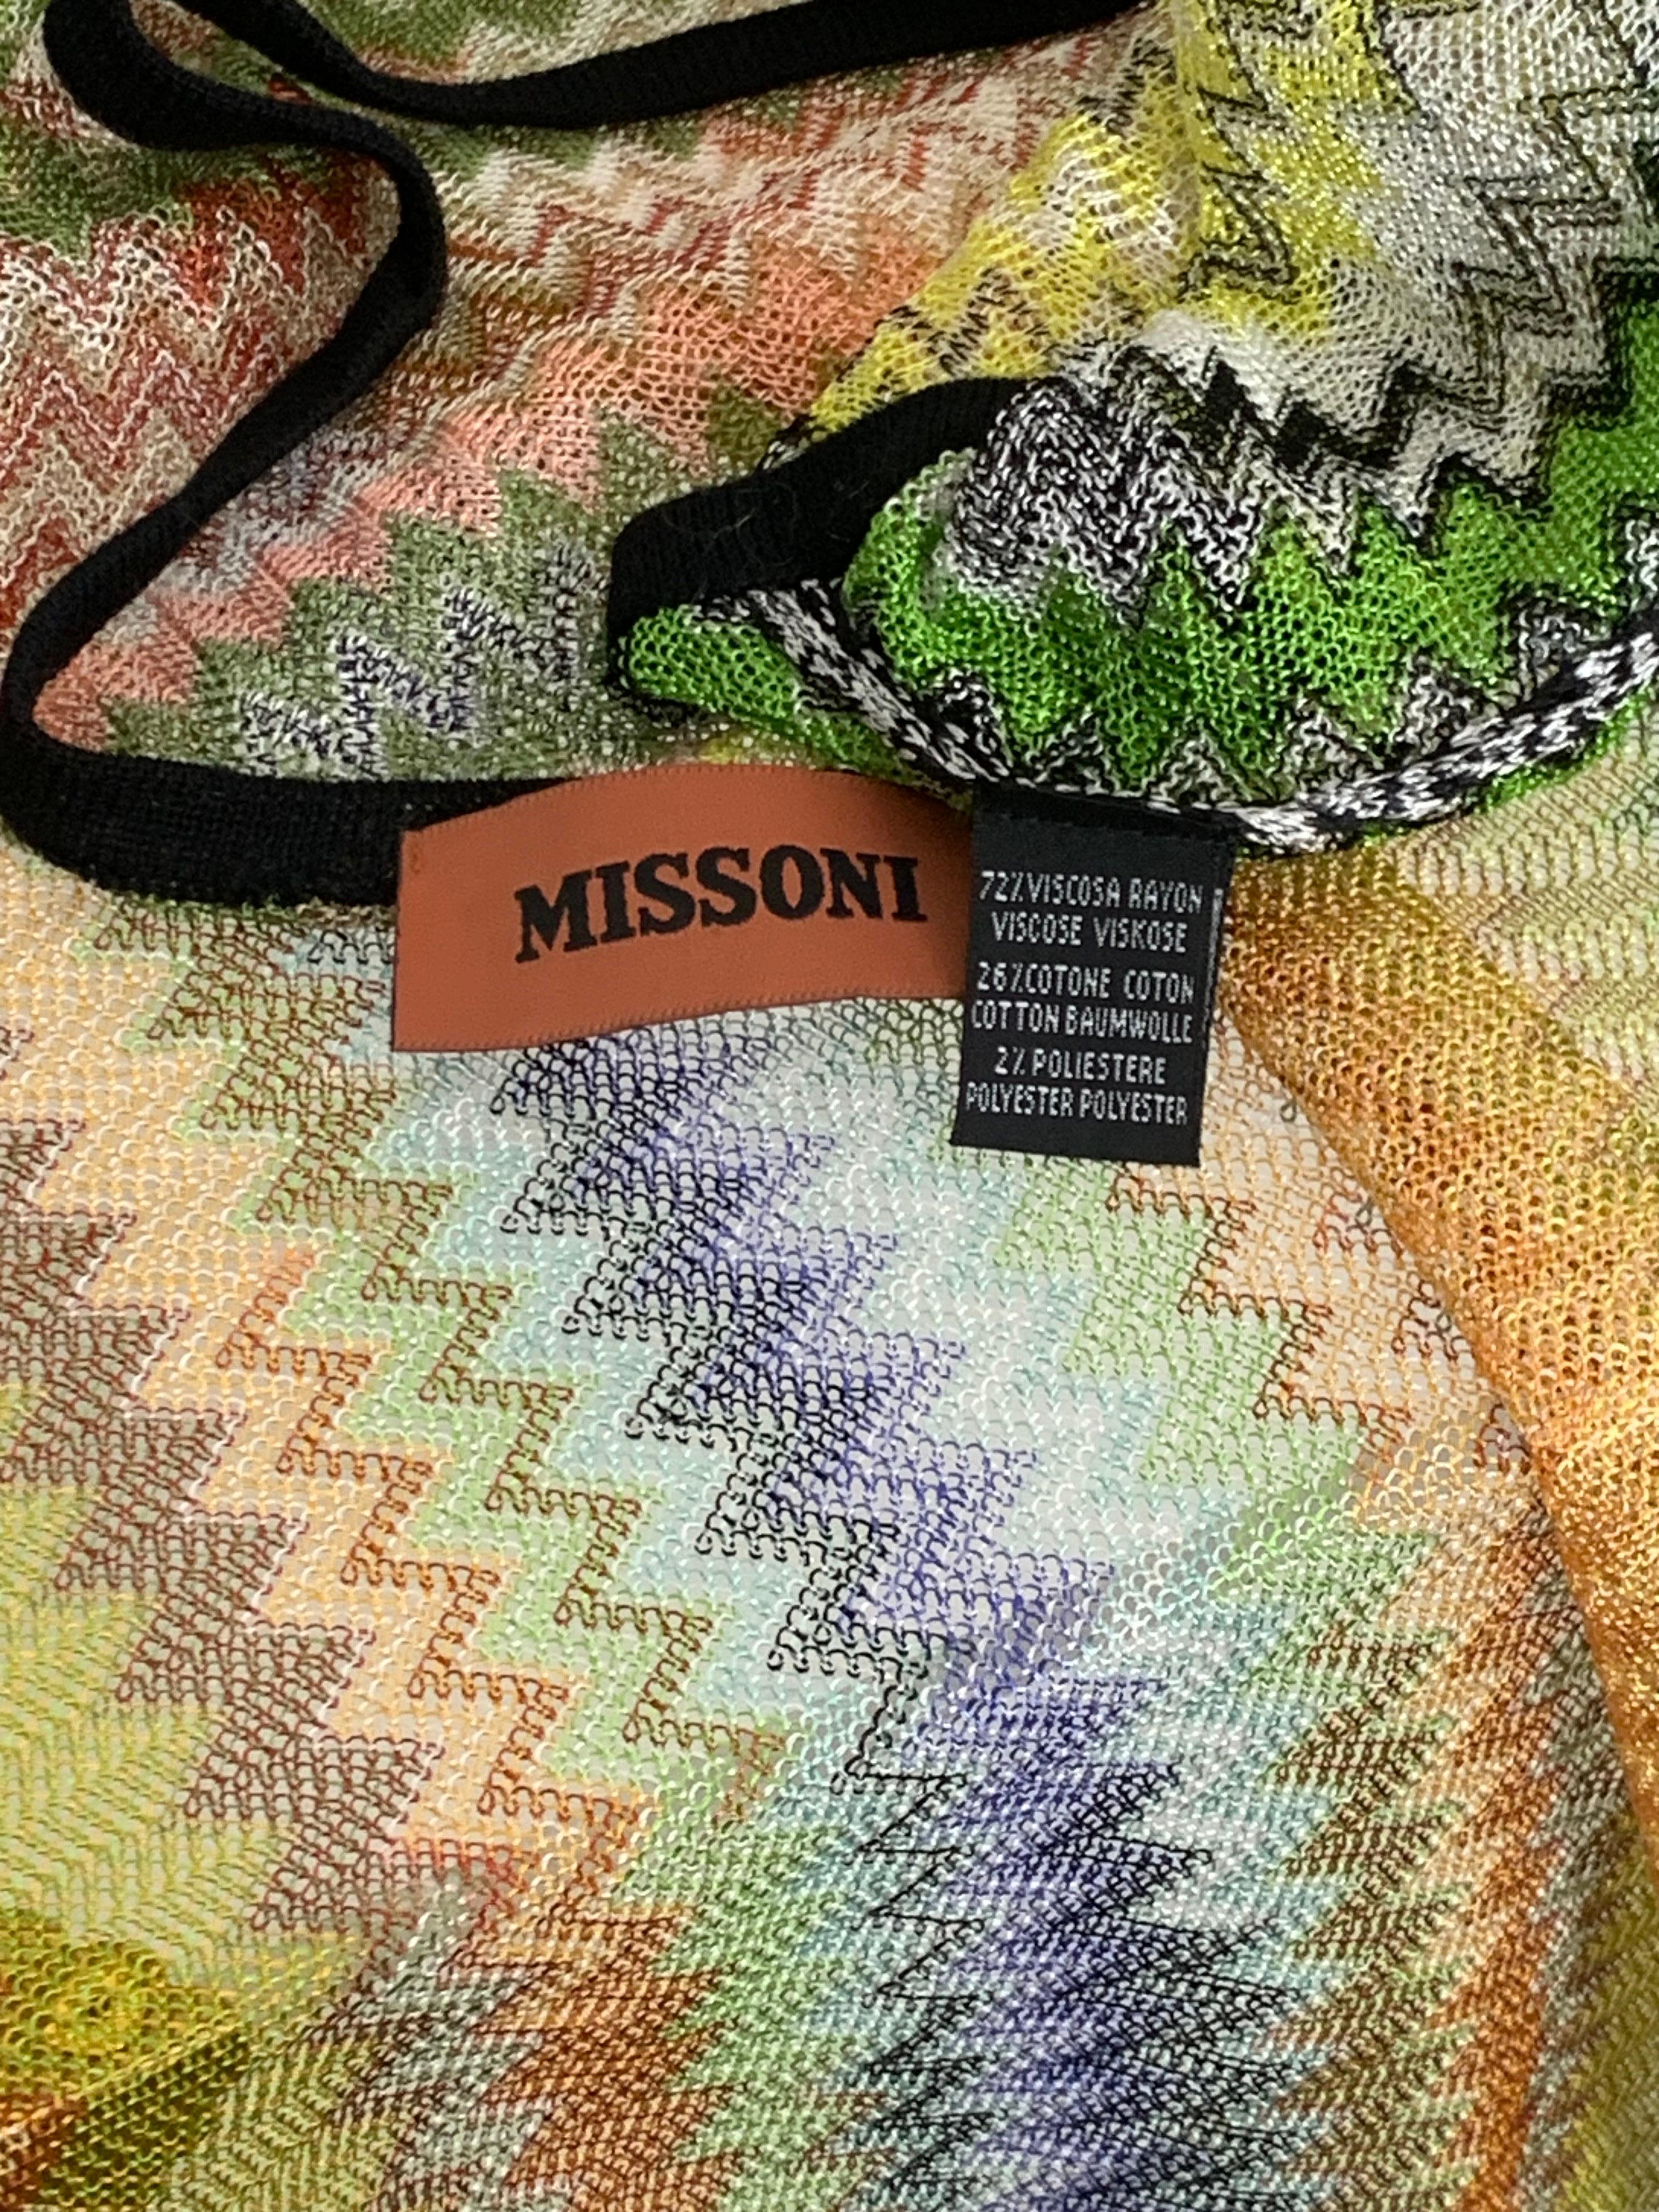 Missoni Spring/Summer Rayon & Cotton Knit Cover-Up in Classic Missoni Zig-Zag For Sale 9